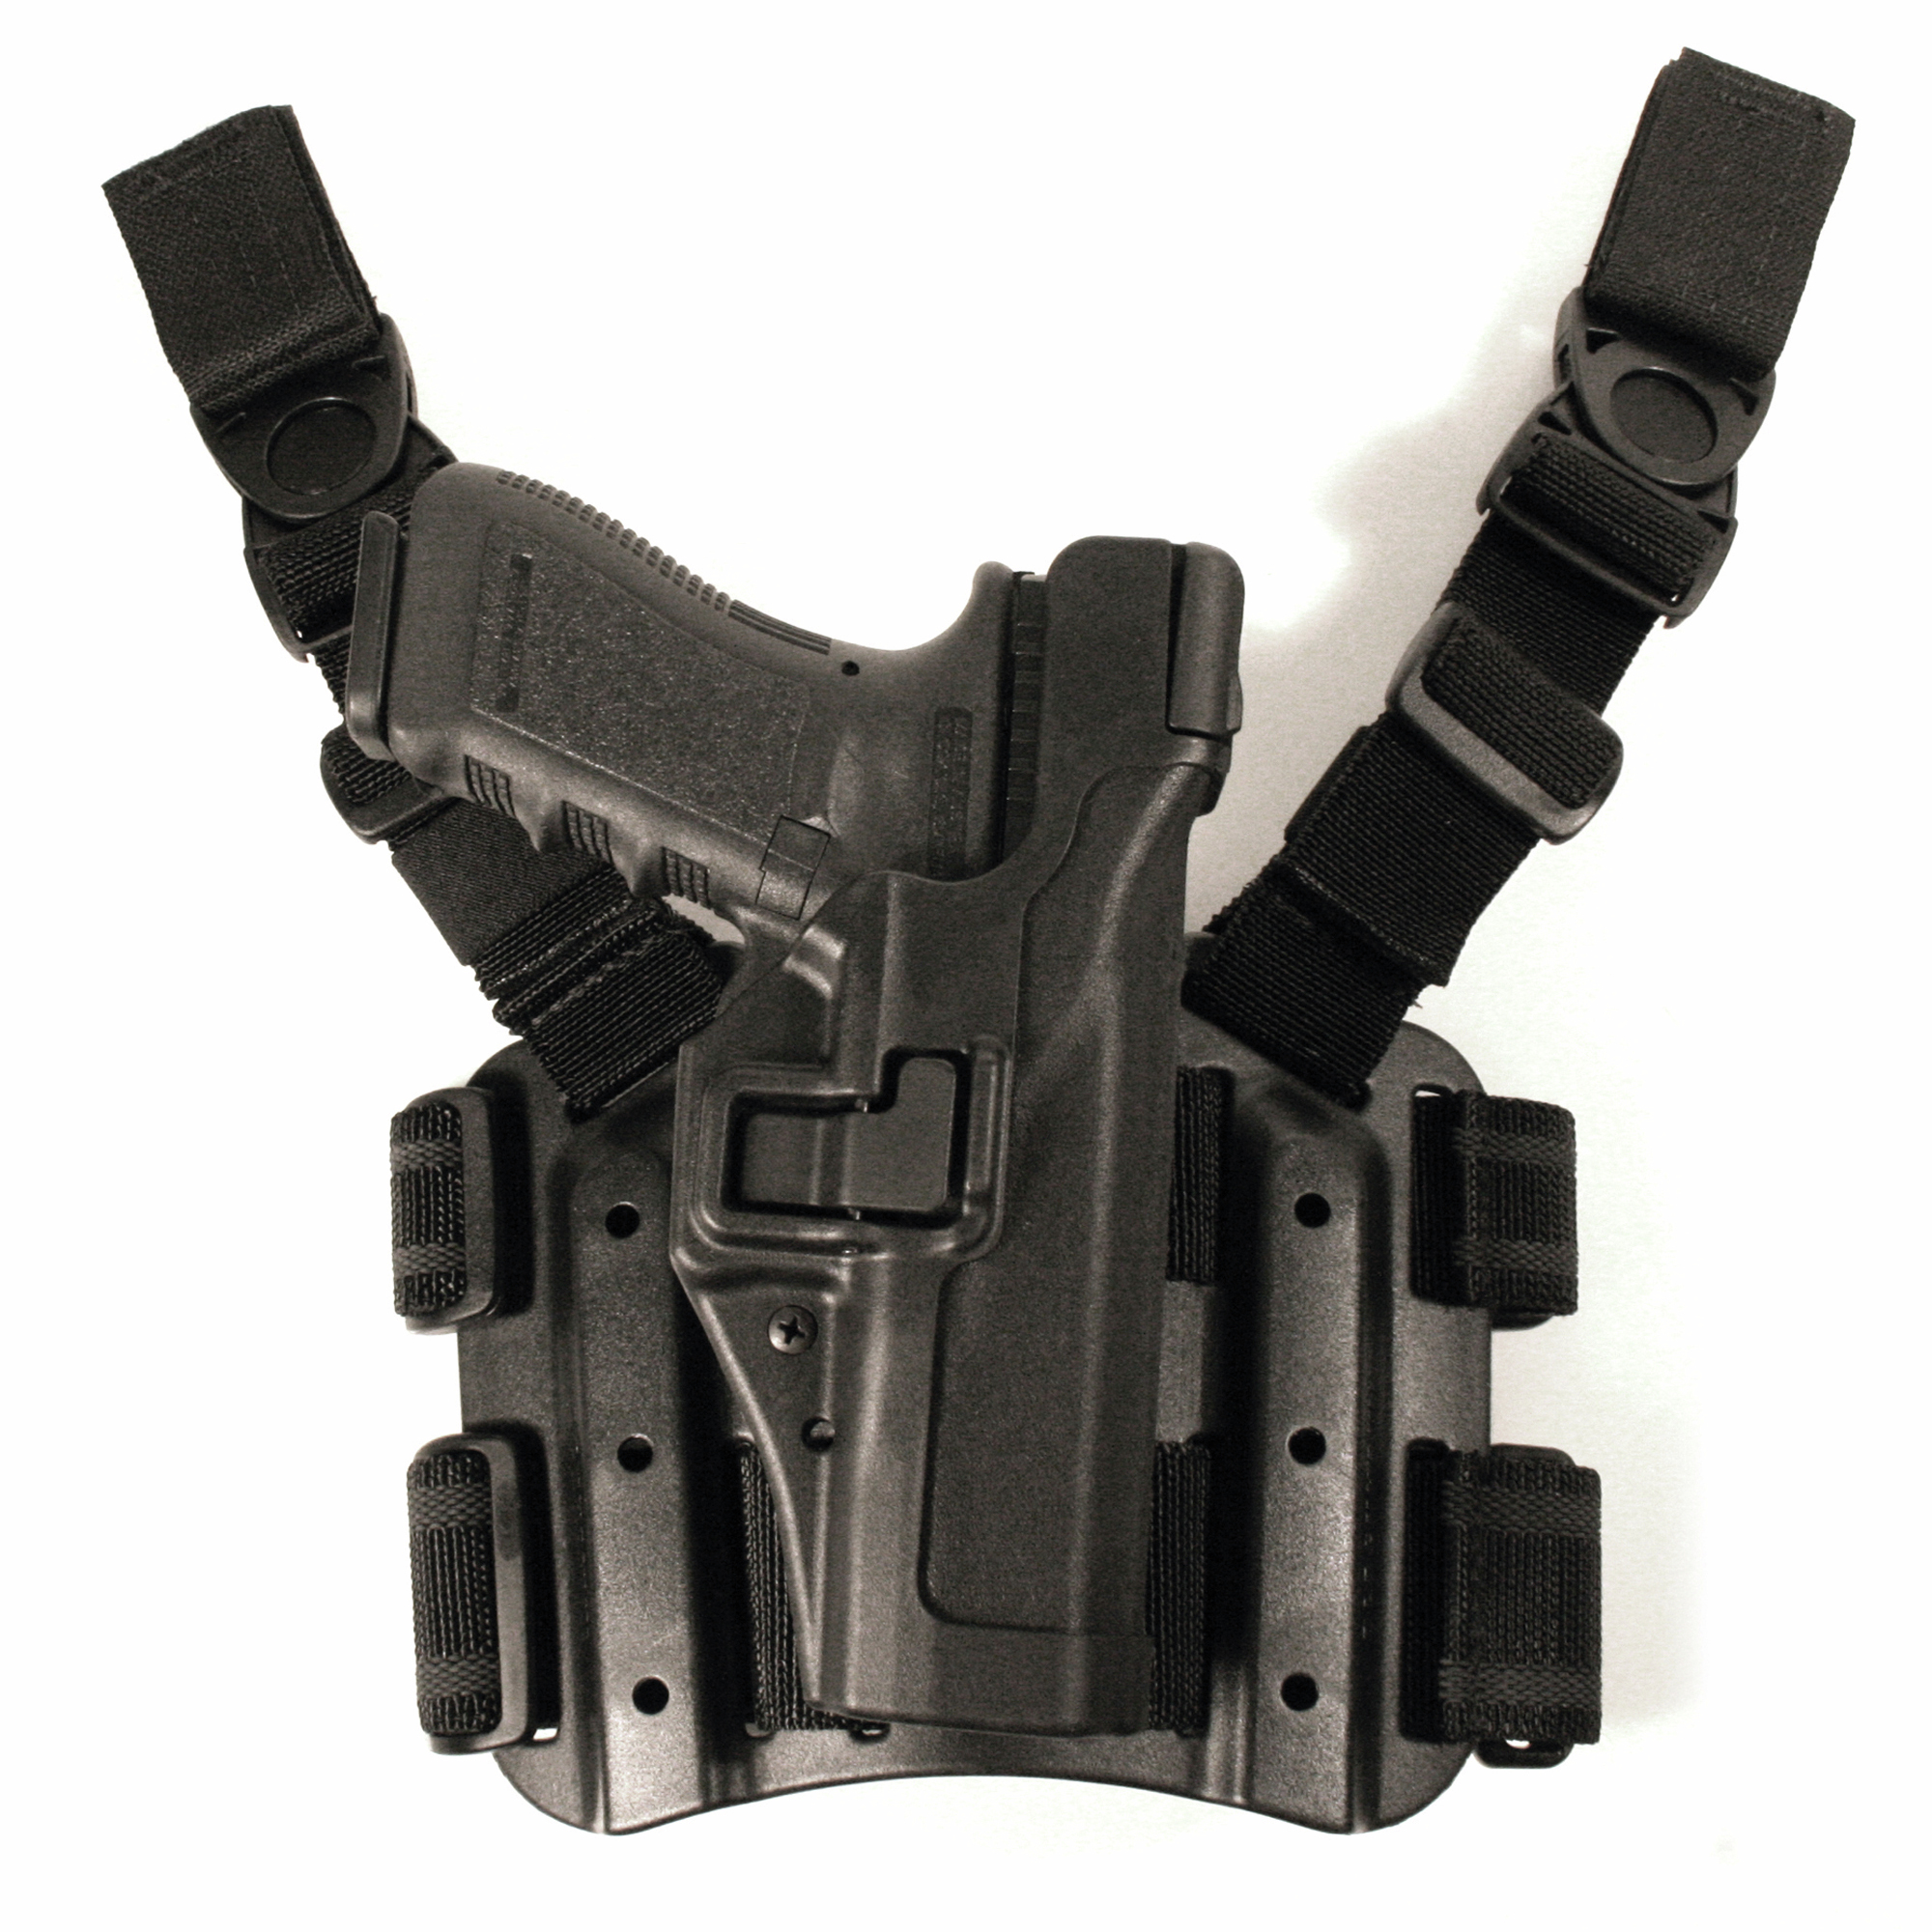 4 in 1 Tactical Drop Leg Right-hand Holster With 2 Pouches for P226 P228 P229 